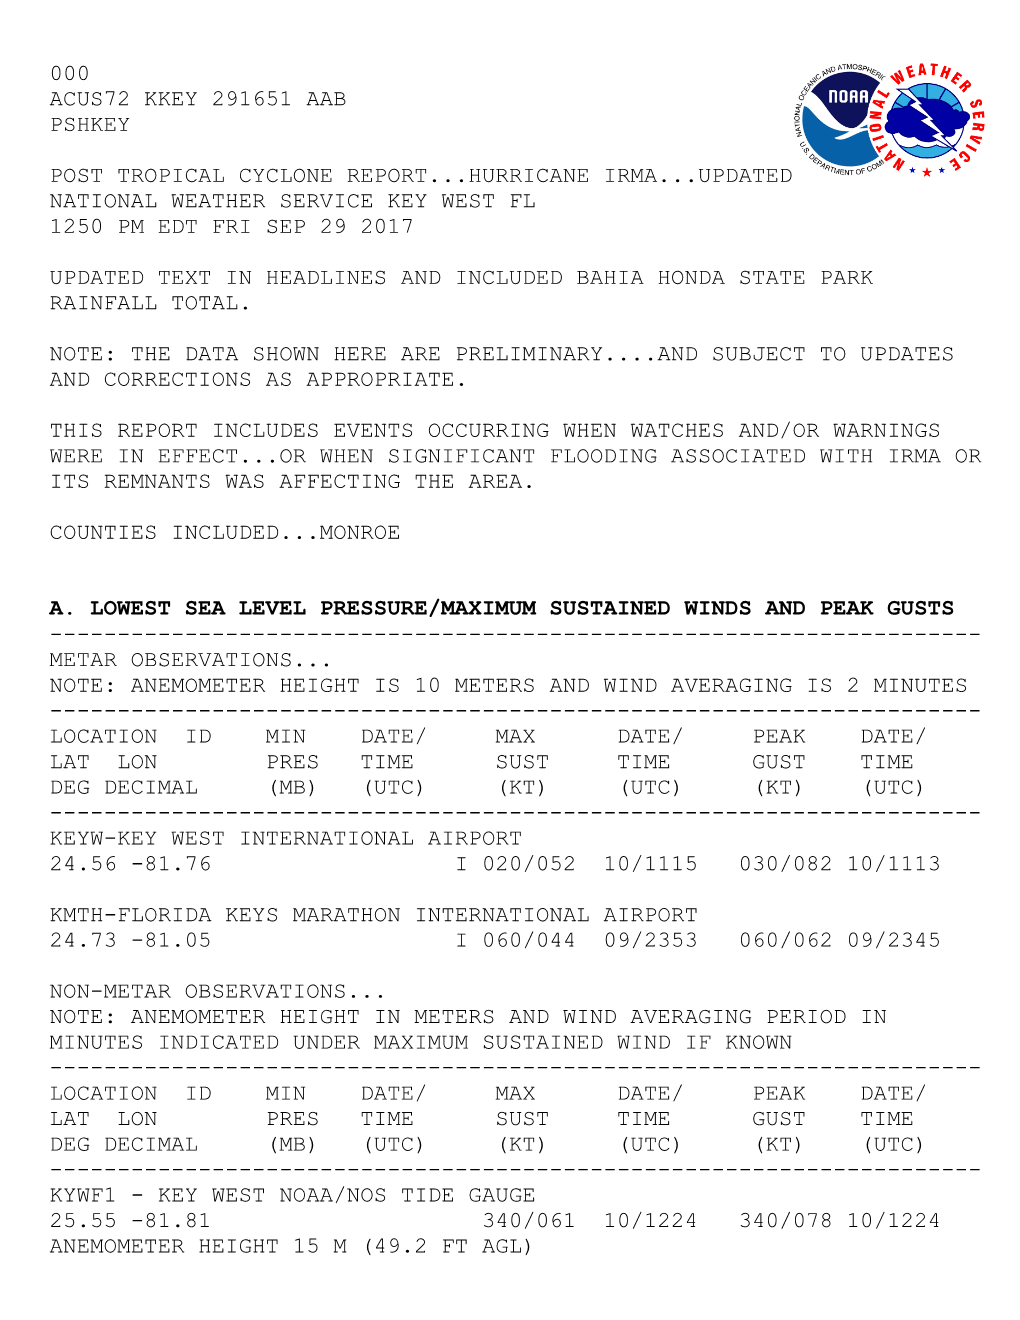 Post Tropical Cyclone Report Of